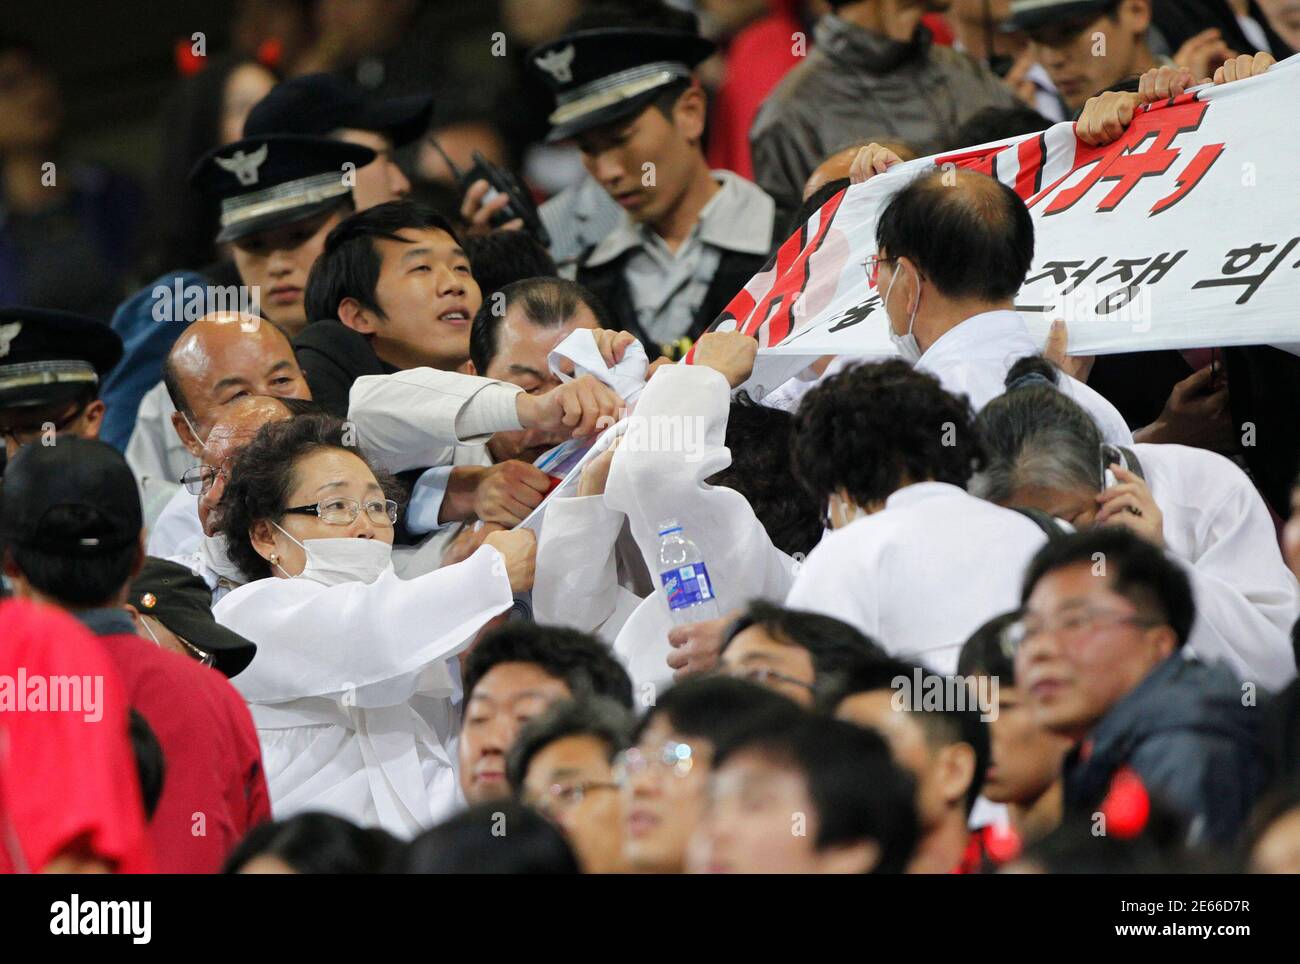 Members (R) of the Association for the Pacific War Victims struggle with police officers as they try to hold an anti-Japan rally demanding full compensation from the Japanese government during a friendly soccer match between South Korea and Japan in Seoul October 12, 2010.  REUTERS/Jo Yong-Hak (SOUTH KOREA - Tags: SPORT SOCCER CIVIL UNREST POLITICS) Stock Photo